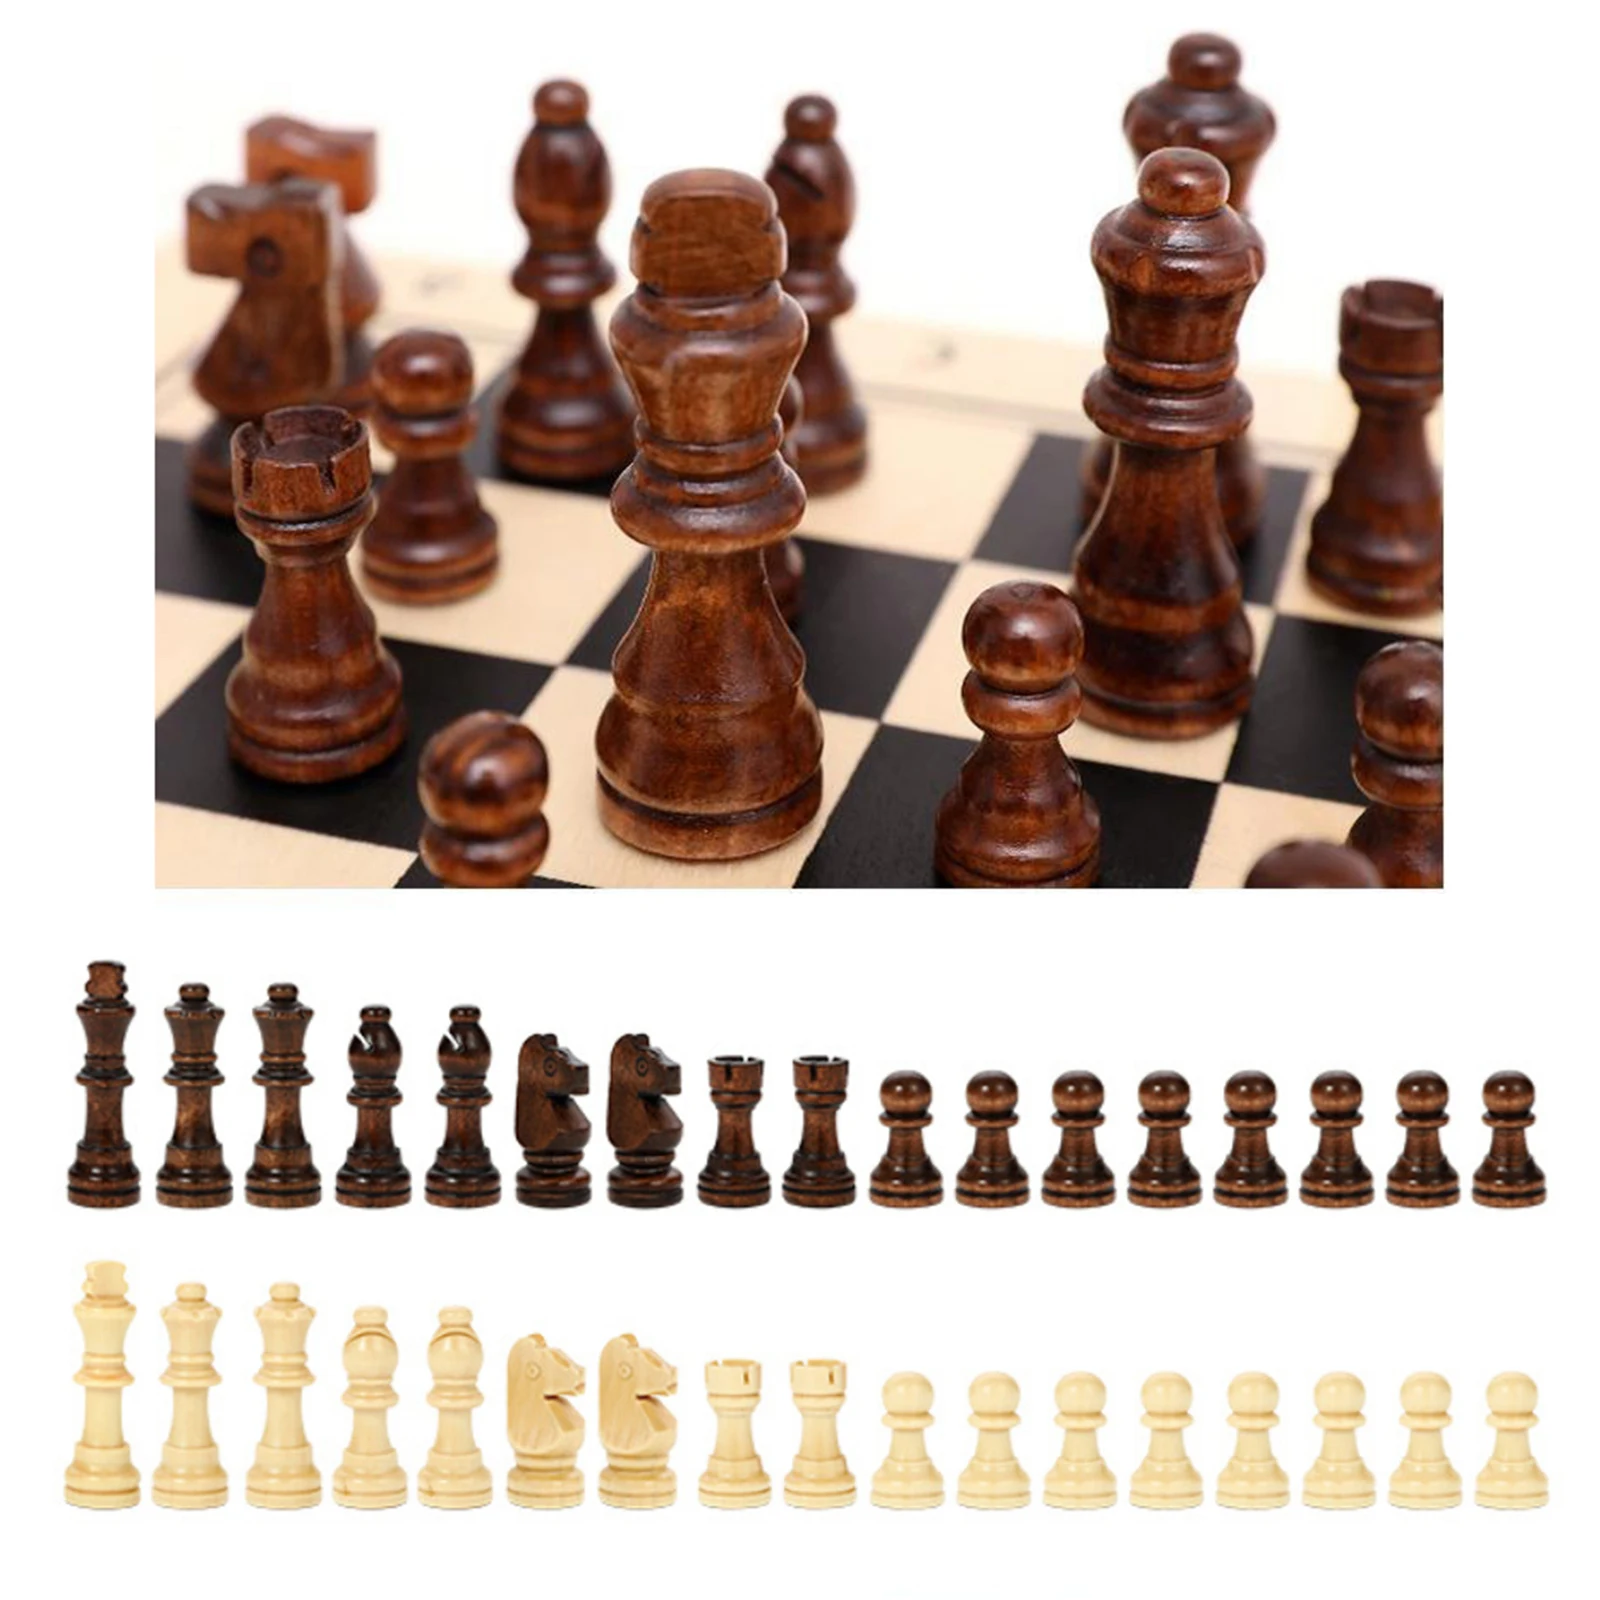 Wooden Magnetic Chess Board Extra 2 Queens 13